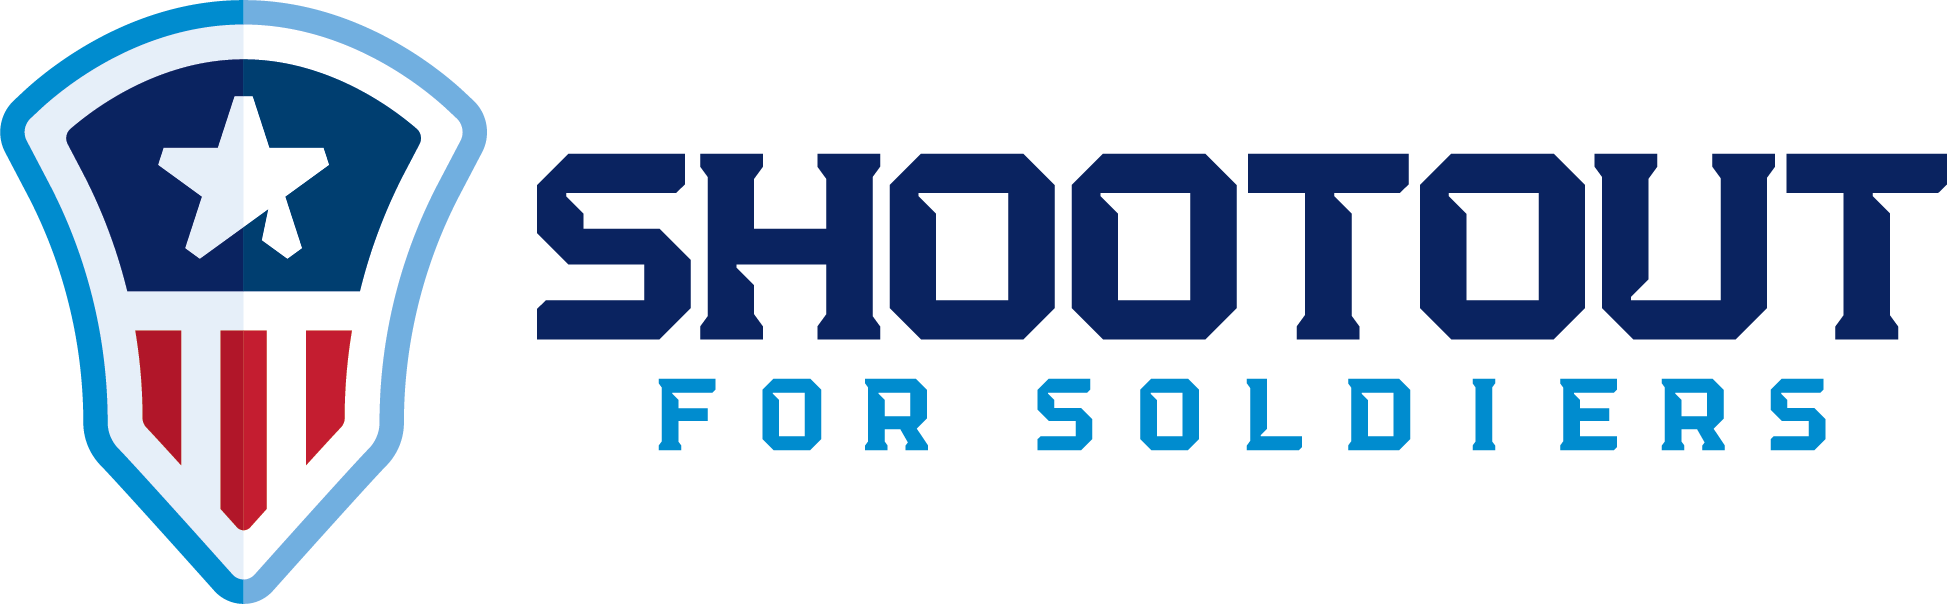 Shootout for Soldiers